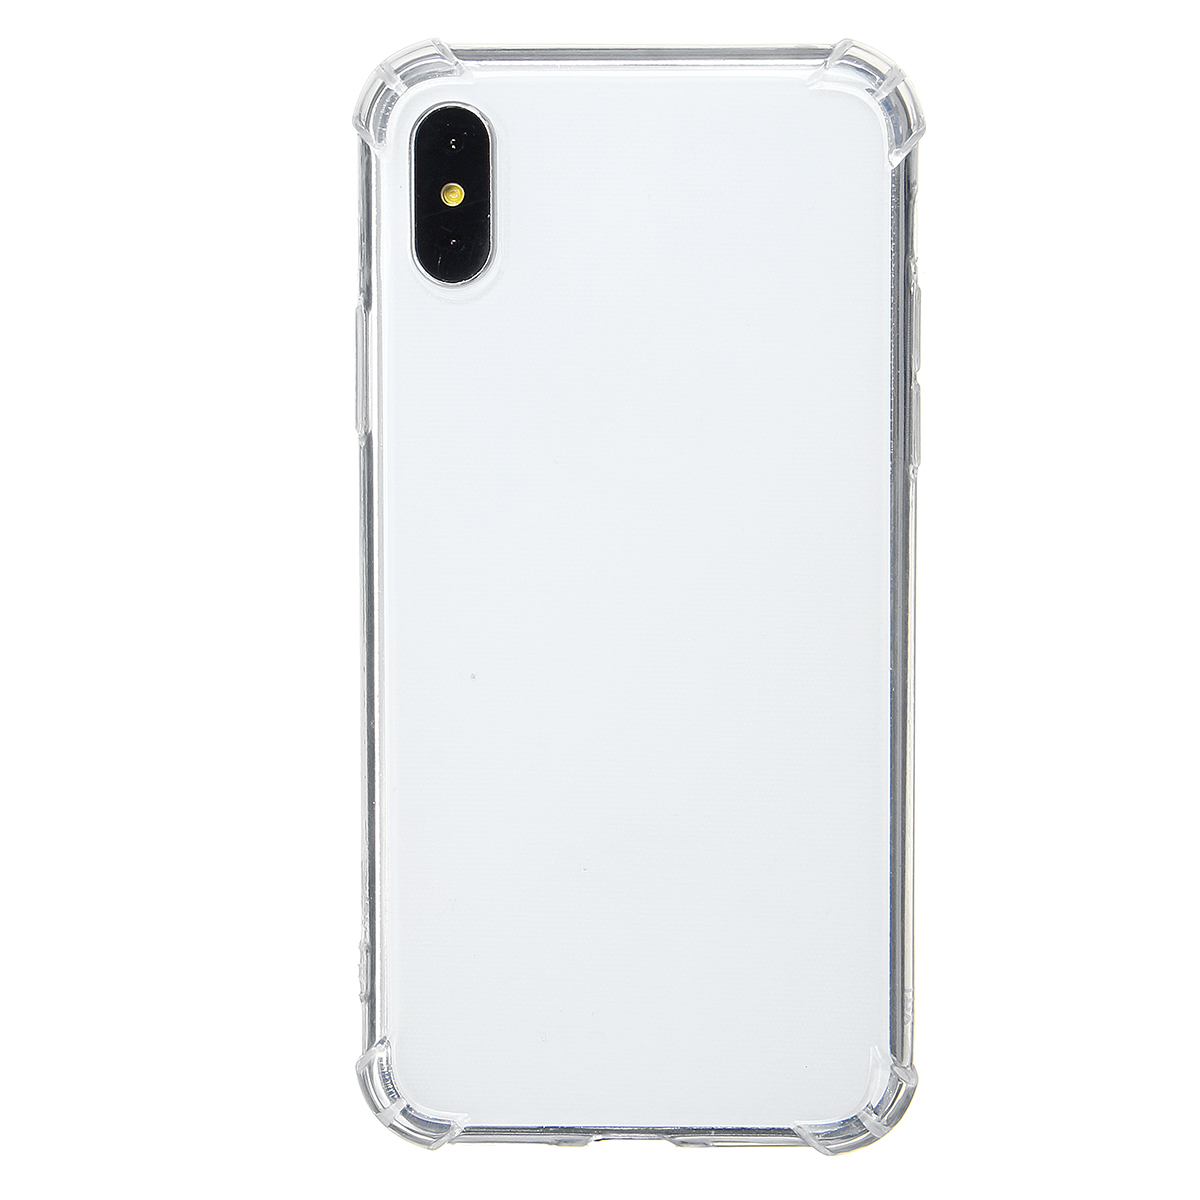 Bakeey-Airbag-Transparent-Clear-Shockproof-Protective-Cover-Case-for-iPhone-X--XS--XR--iP-XS-Max-1633378-1